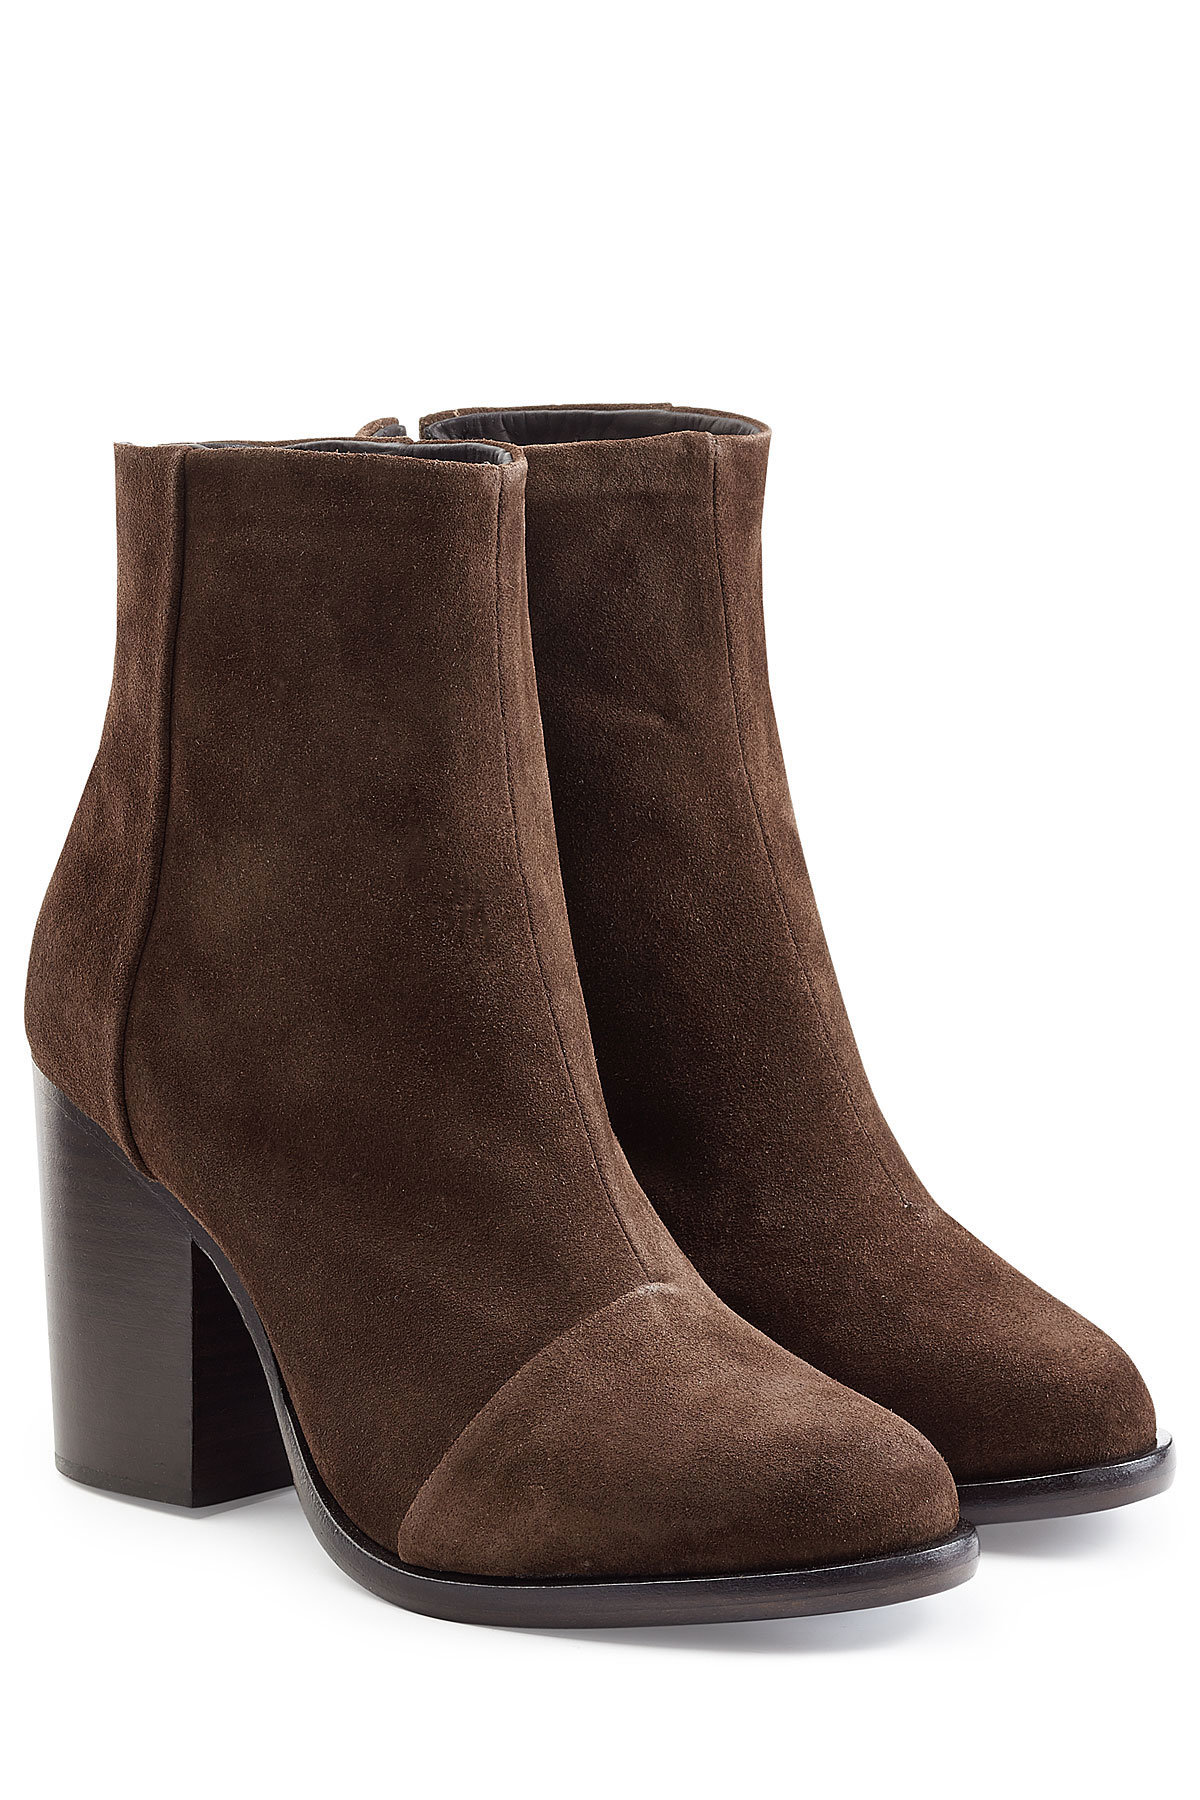 Rag & Bone - Ashby Suede Ankle Boots